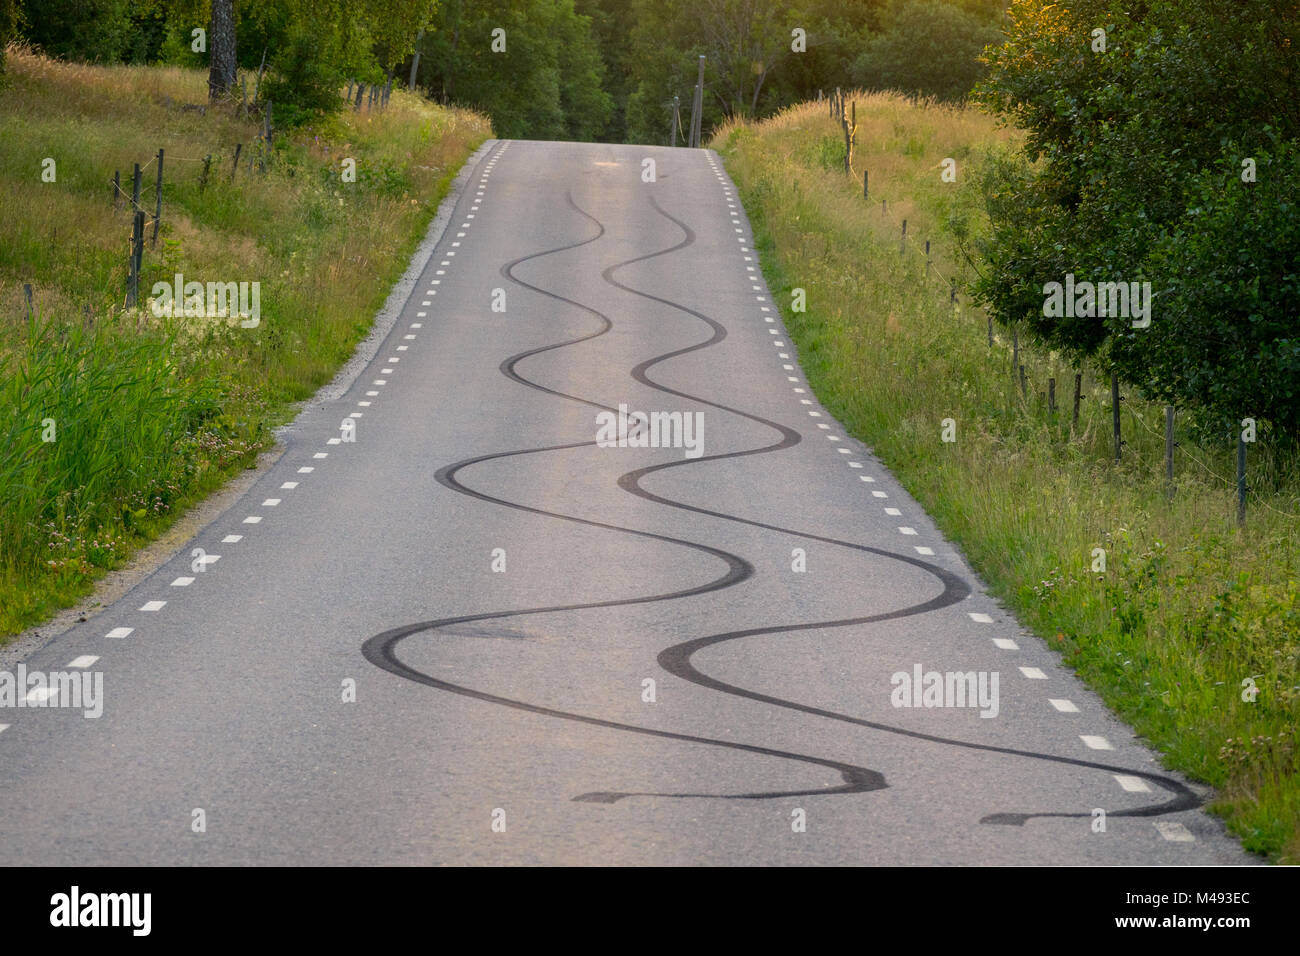 Skid marks on a road Stock Photo - Alamy